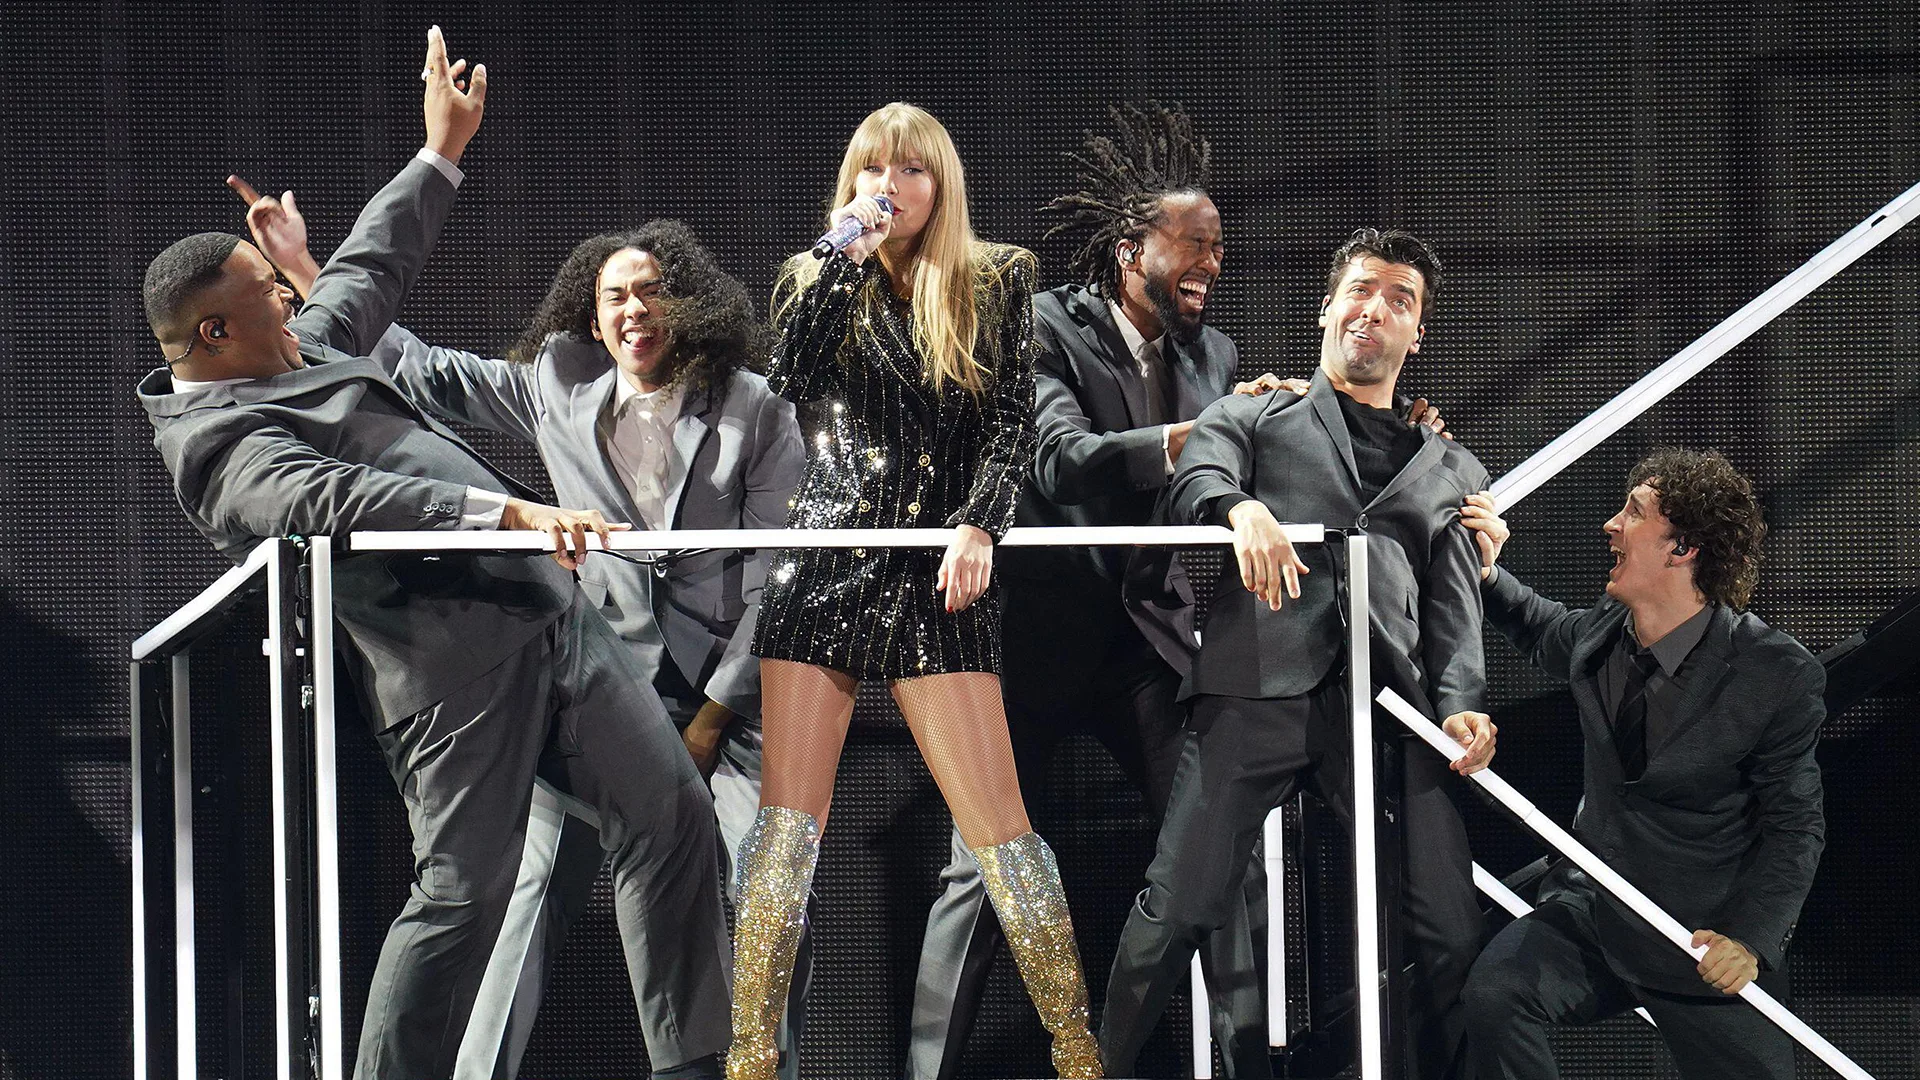 Taylor Swift and 5 male dancers wearing black suits perform on stage